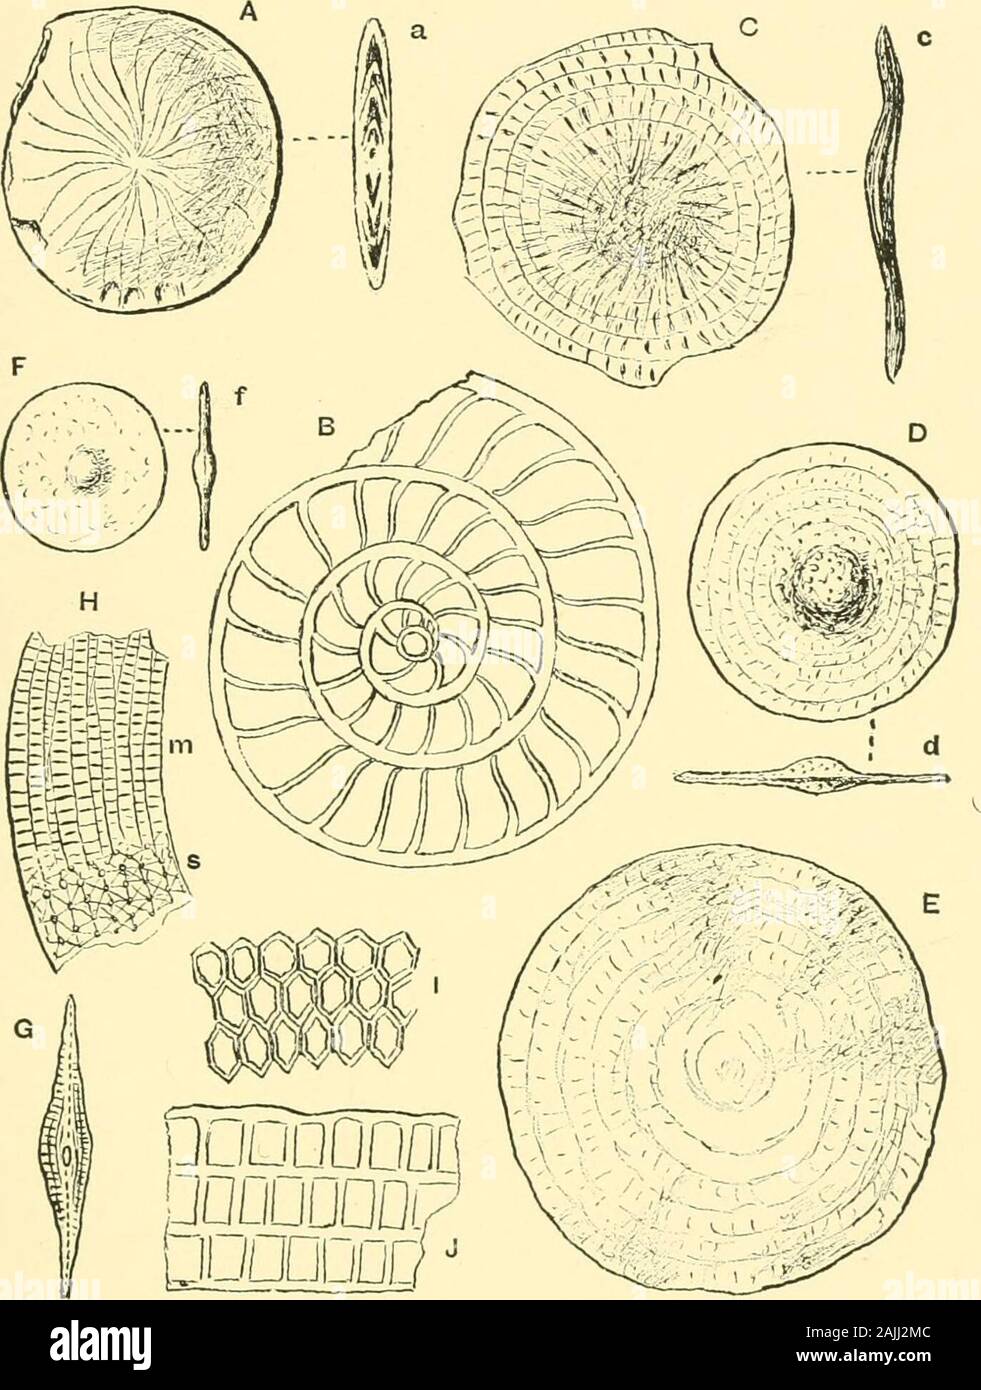 The Foraminifera An Introduction To The Study Of The Protozoa Ing Based On External Form Alone 248 The Foeaminifeka Explanation Of Plate 14 Fig A A Nummulites Elegans Sowerby Sp A